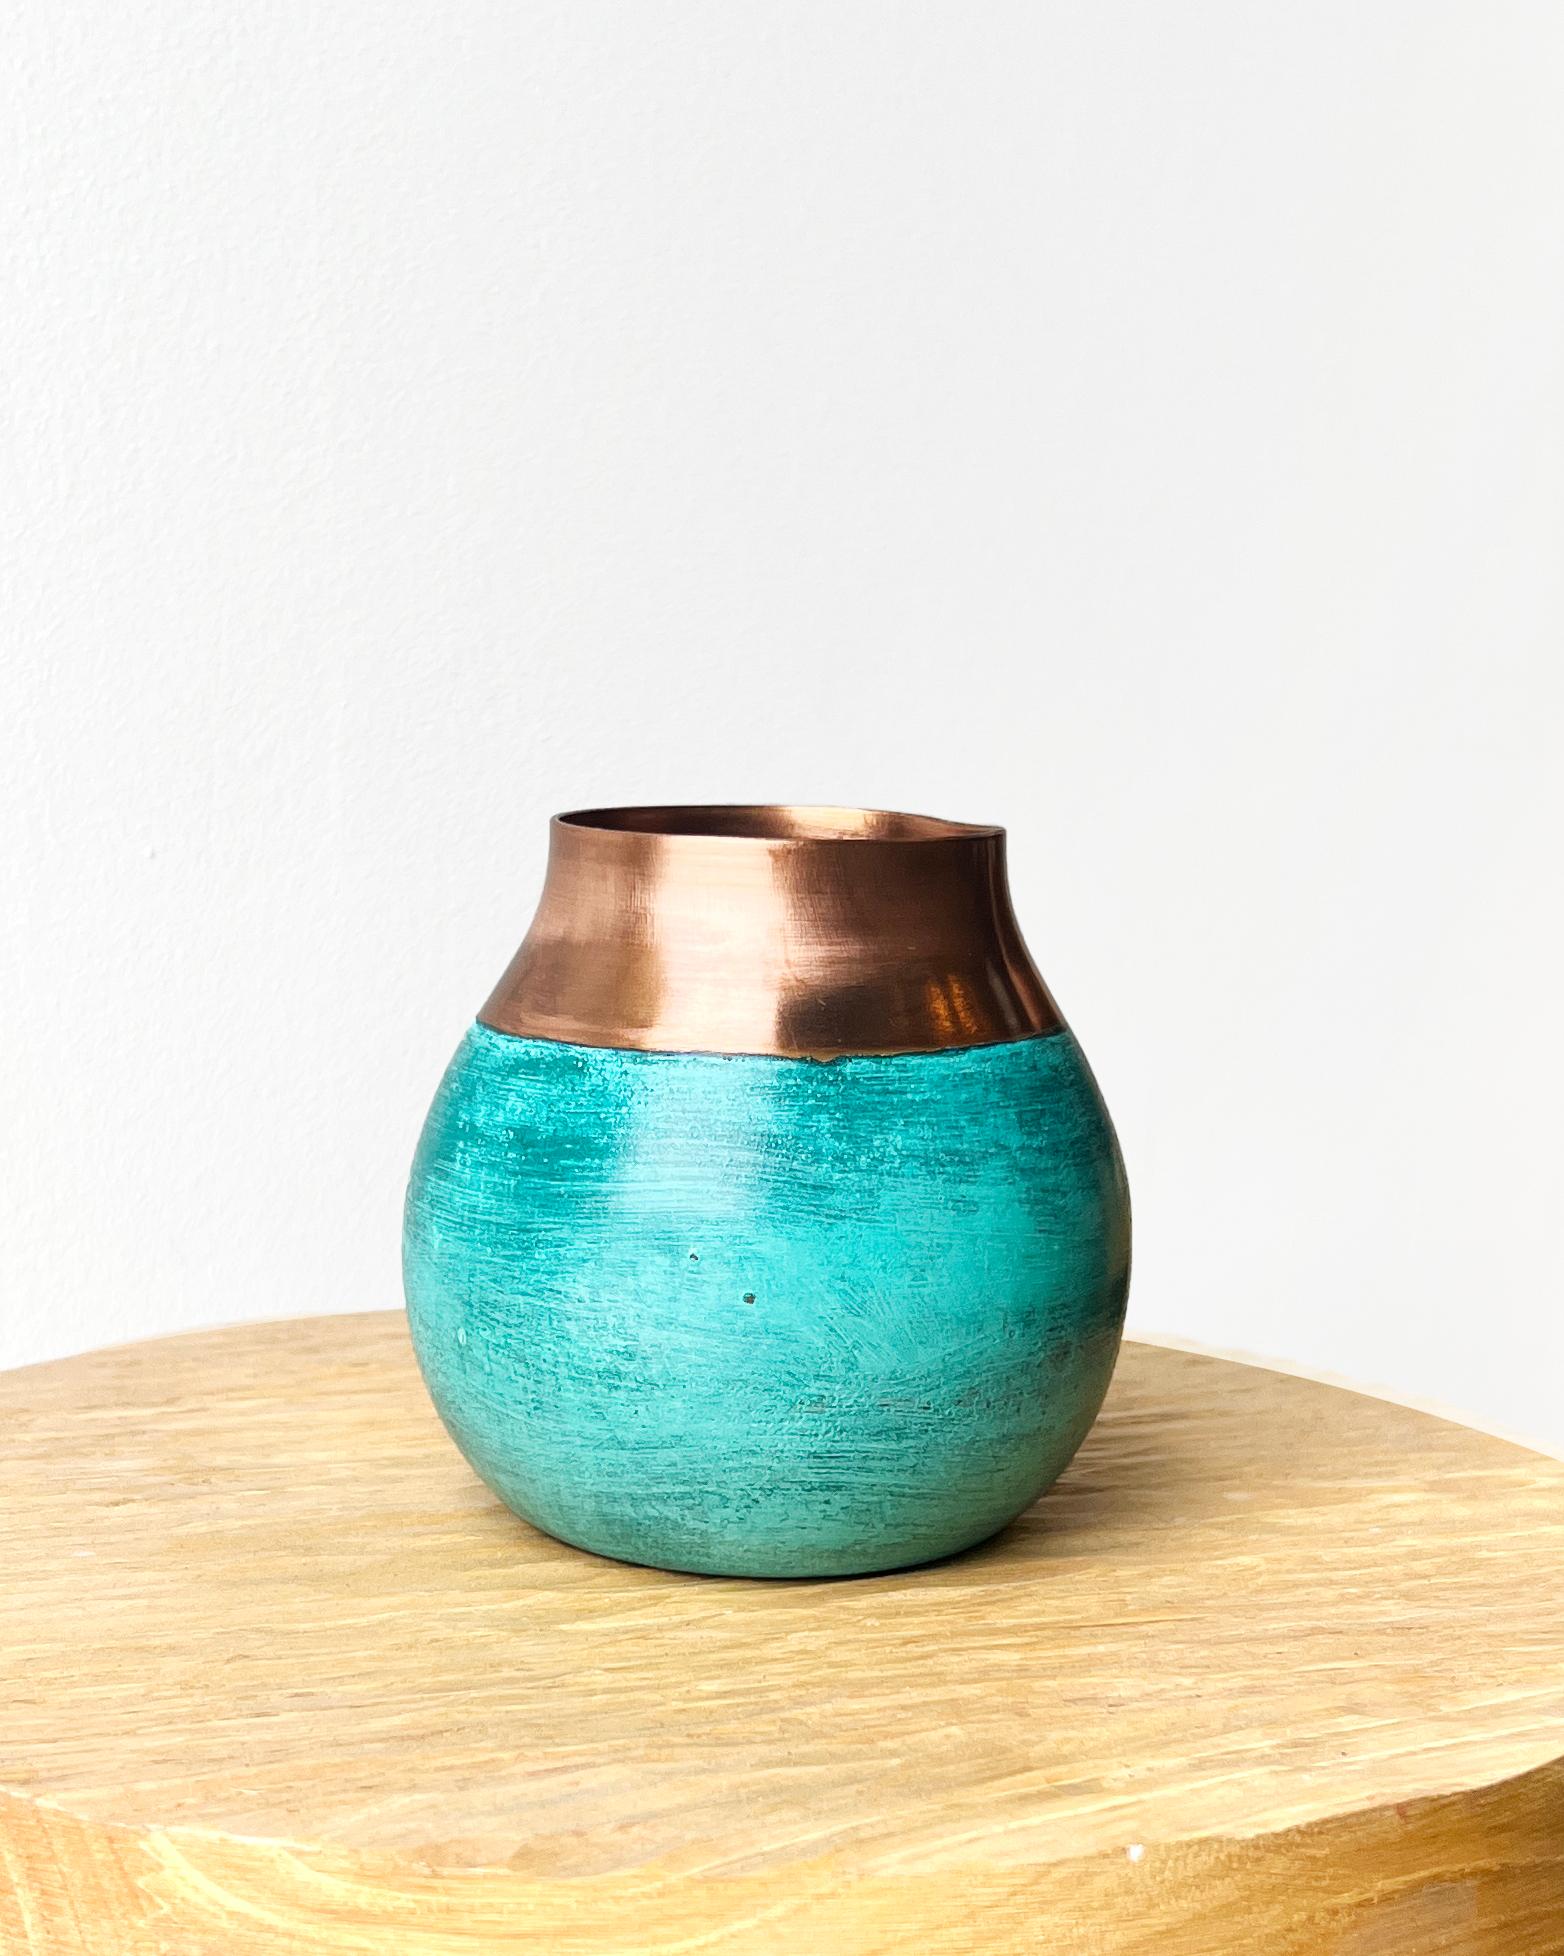 A copper accent to brighten your home
Introducing the Ritual Mate Cup: the perfect accent piece for any home. This unique copper cup is modeled after the traditional gourd used to drink mate. The green patina finish gives it an antique look, making